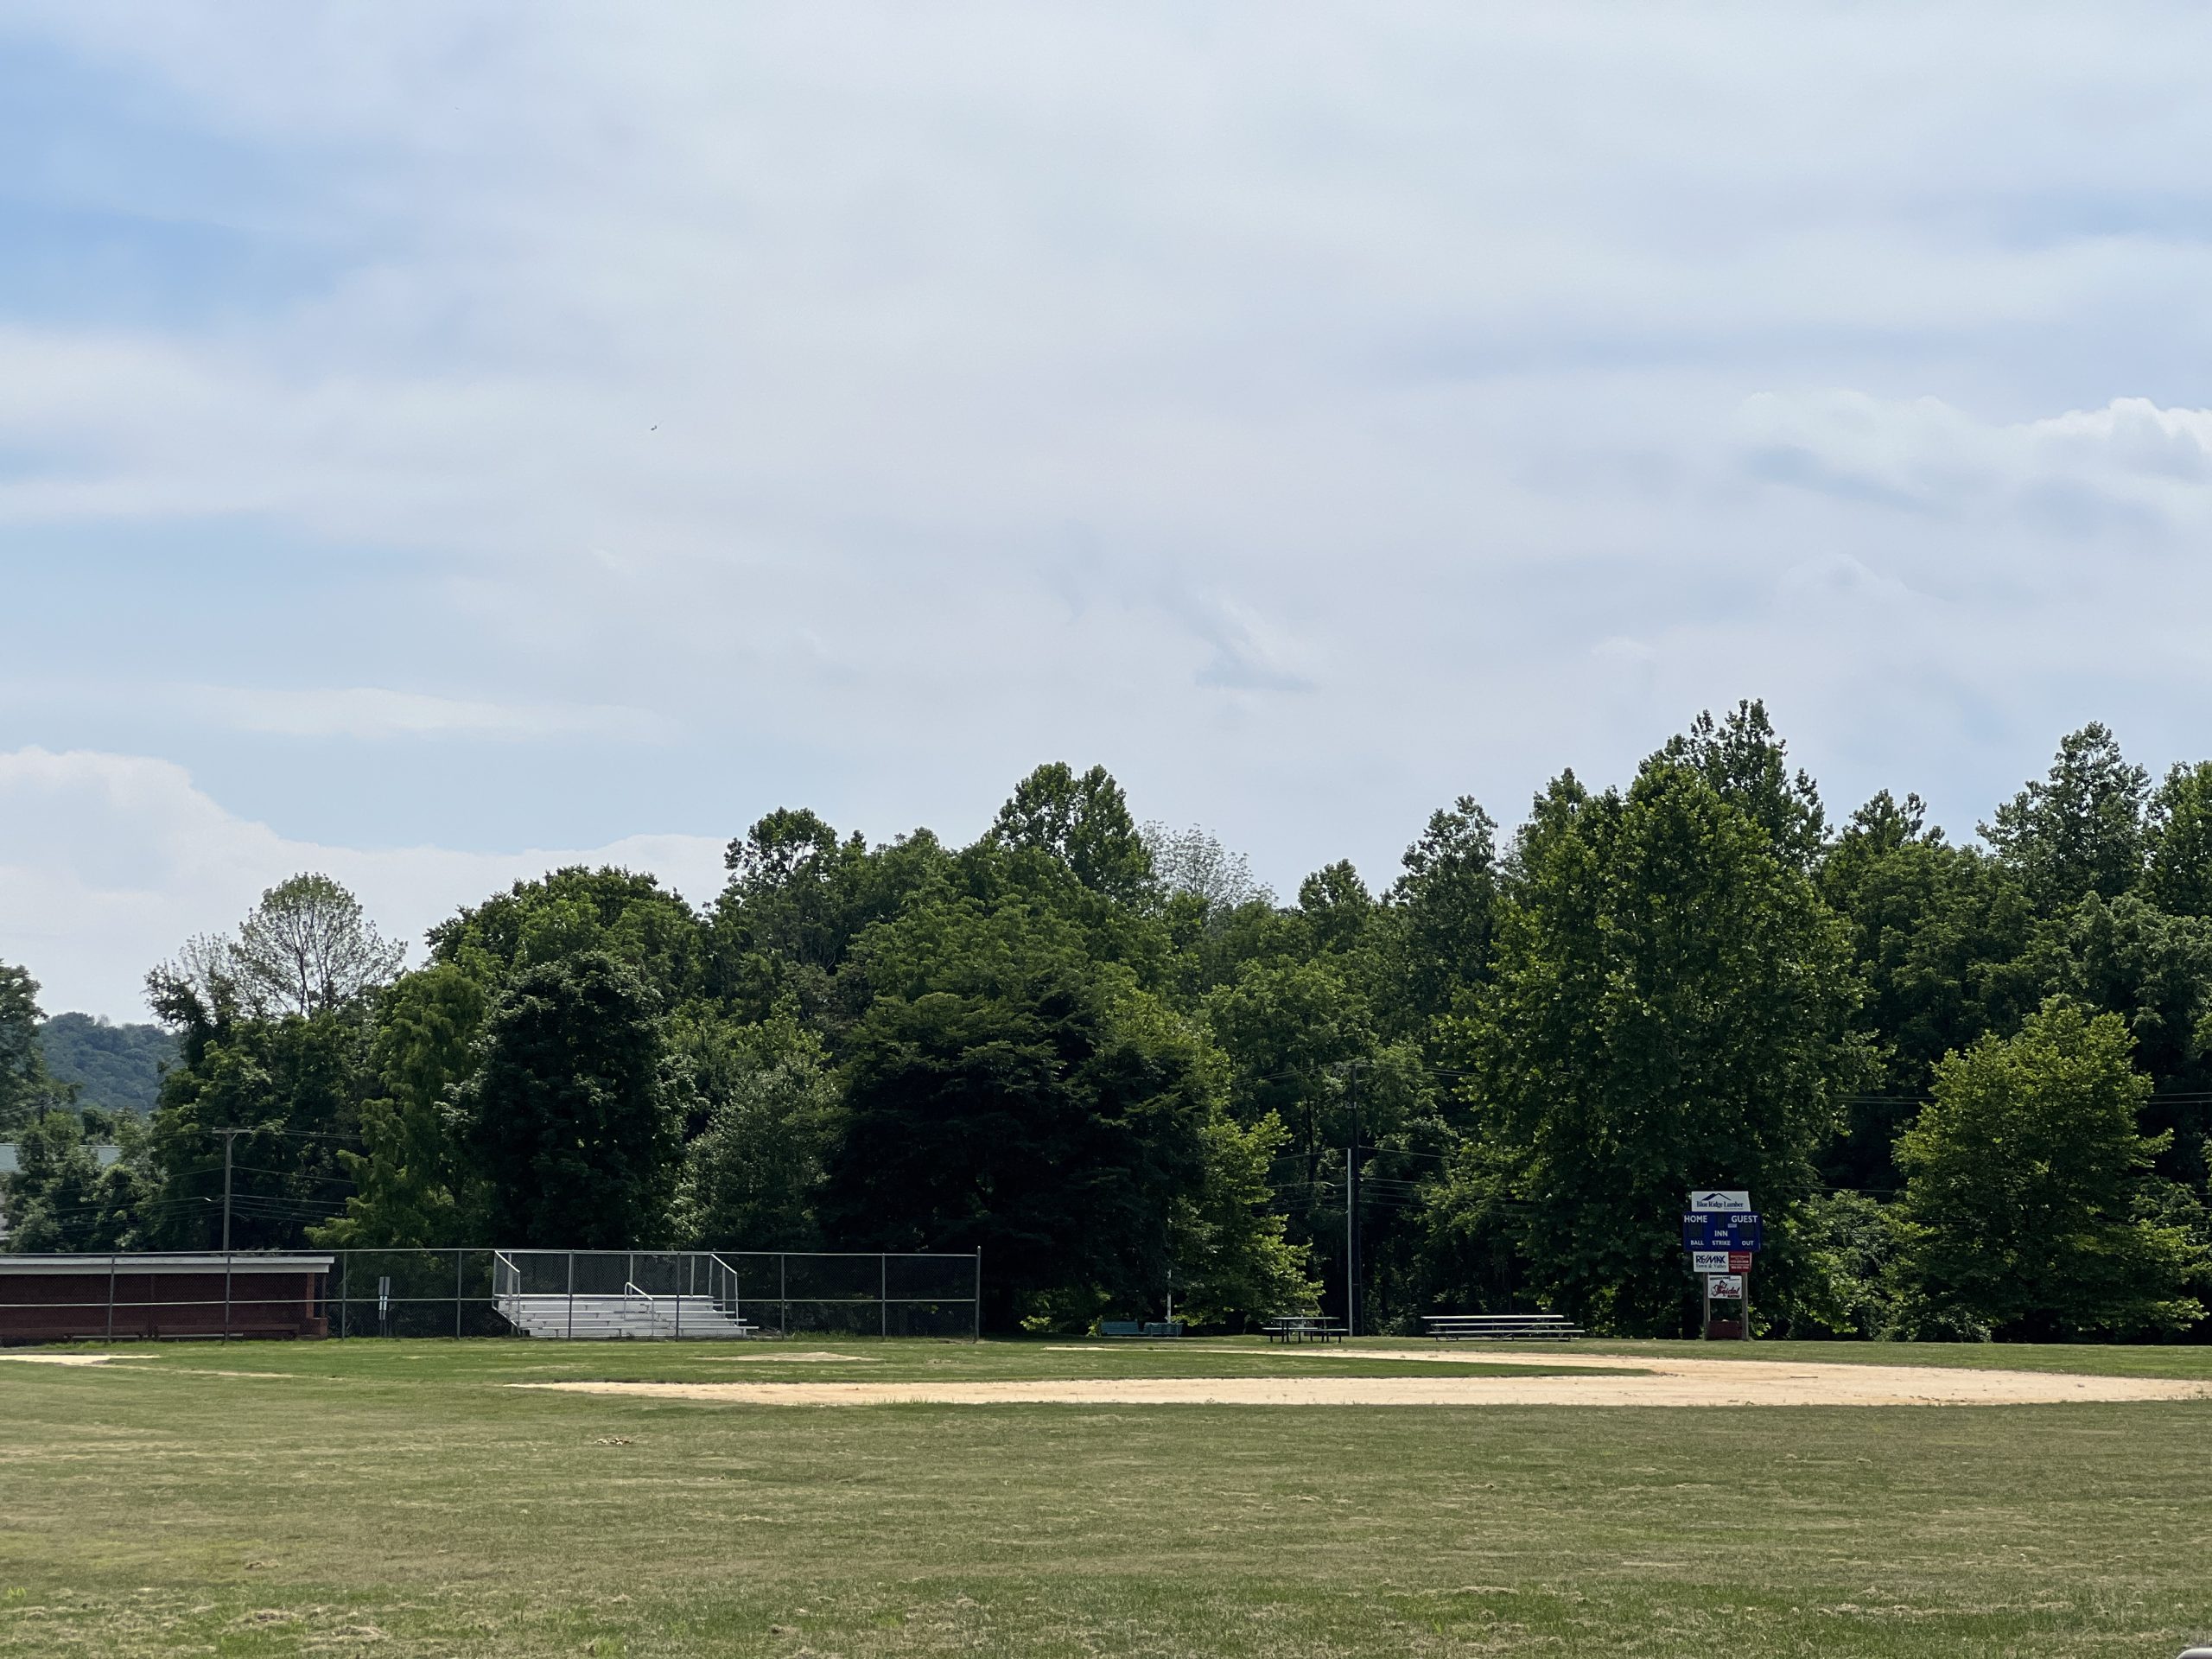 Sycamore Park in Blairstown NJ - Baseball Field